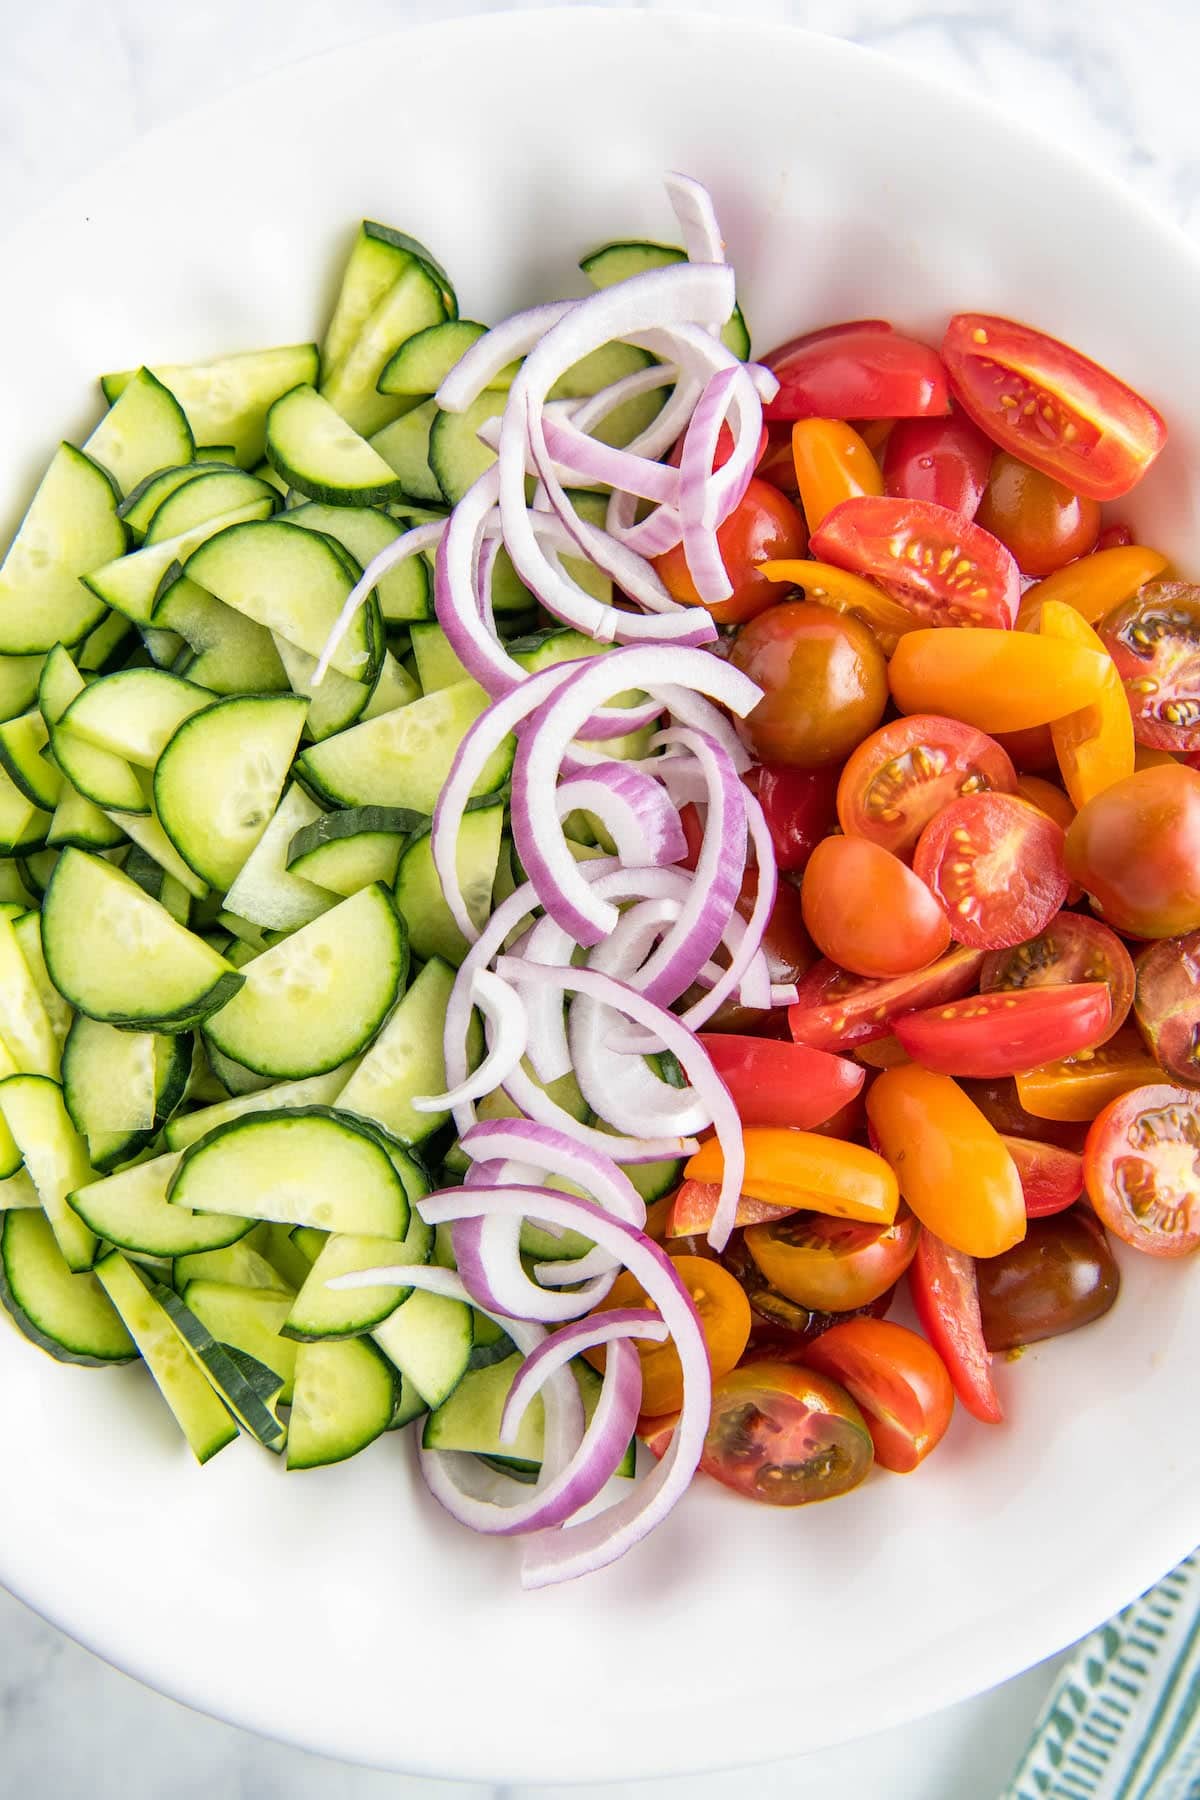 Cucumbers, onions and tomatoes lined up in a white bowl.